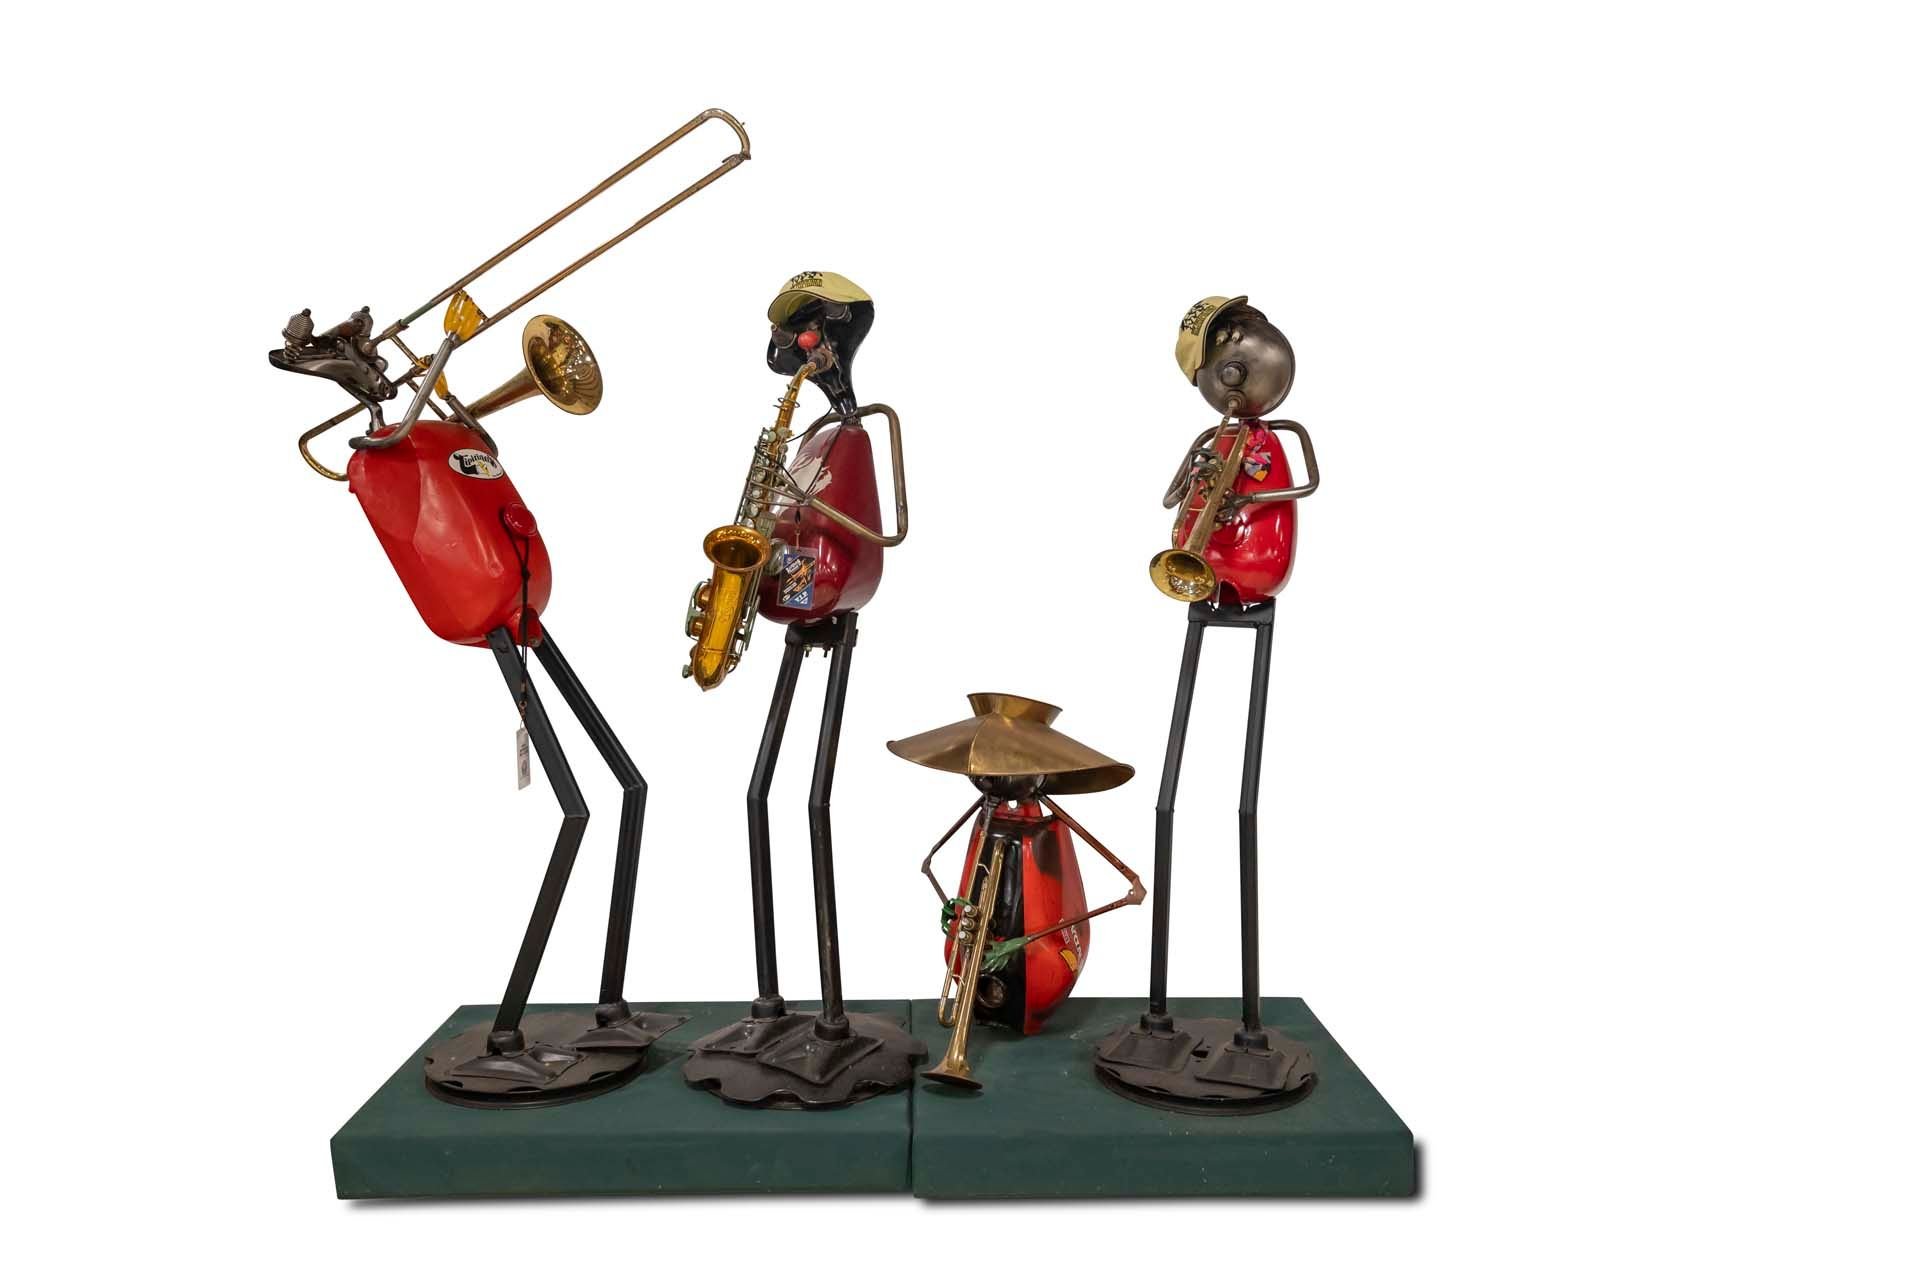 For Sale Upcycled Motor Cycle Parts into Large Jazz Band Figurines